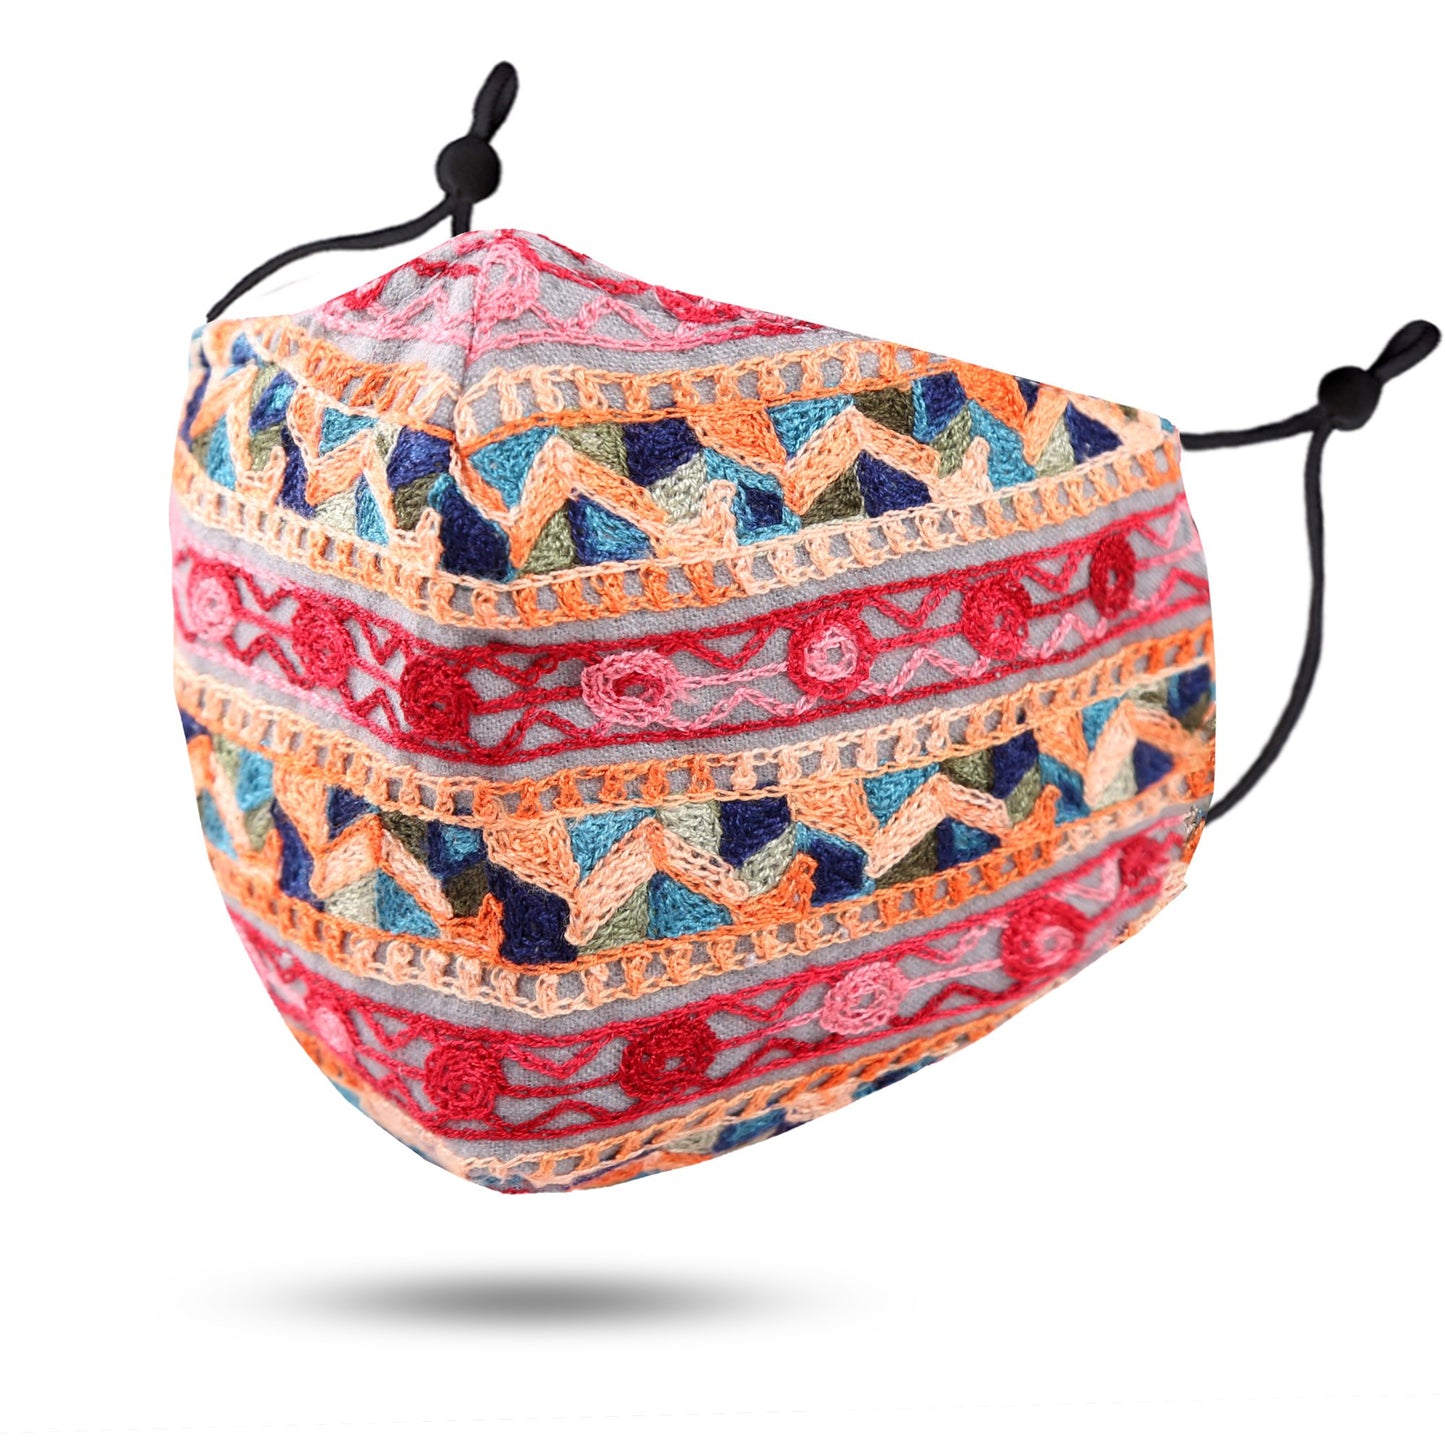 Embroidered Washable & Reusable Winter Cotton Face Mask W/ Diamond Shaped Lining & Filter Pocket 